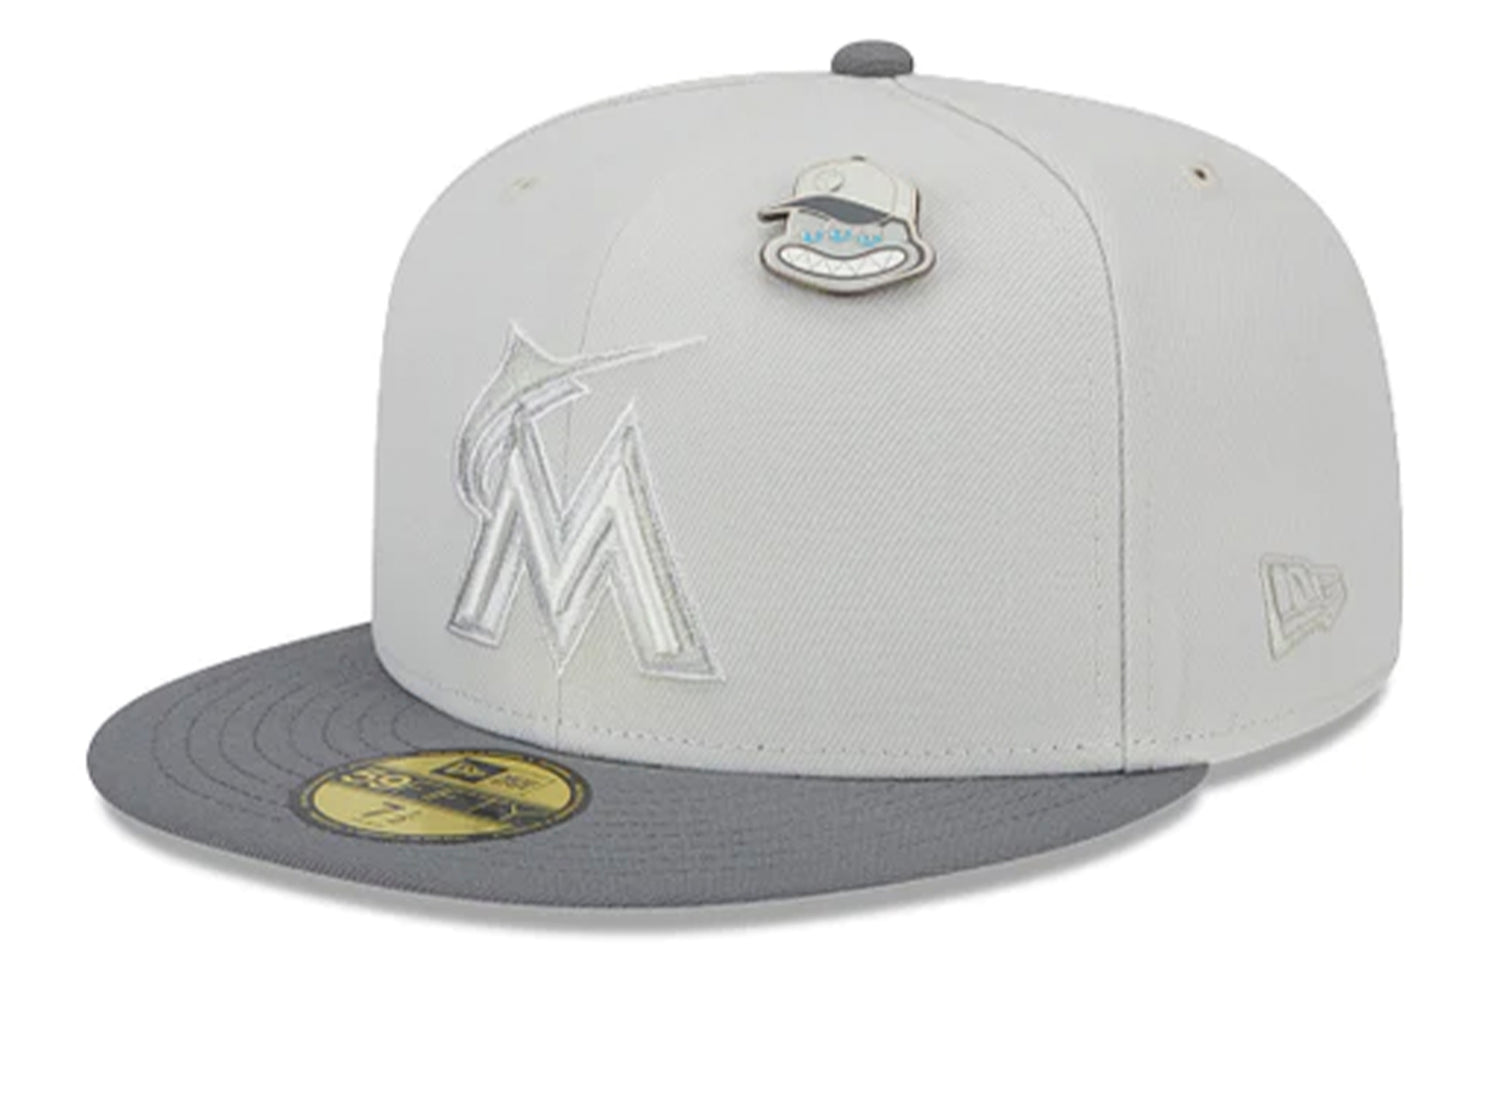 New Era Outer Space Miami Marlins Hat 7 3/8